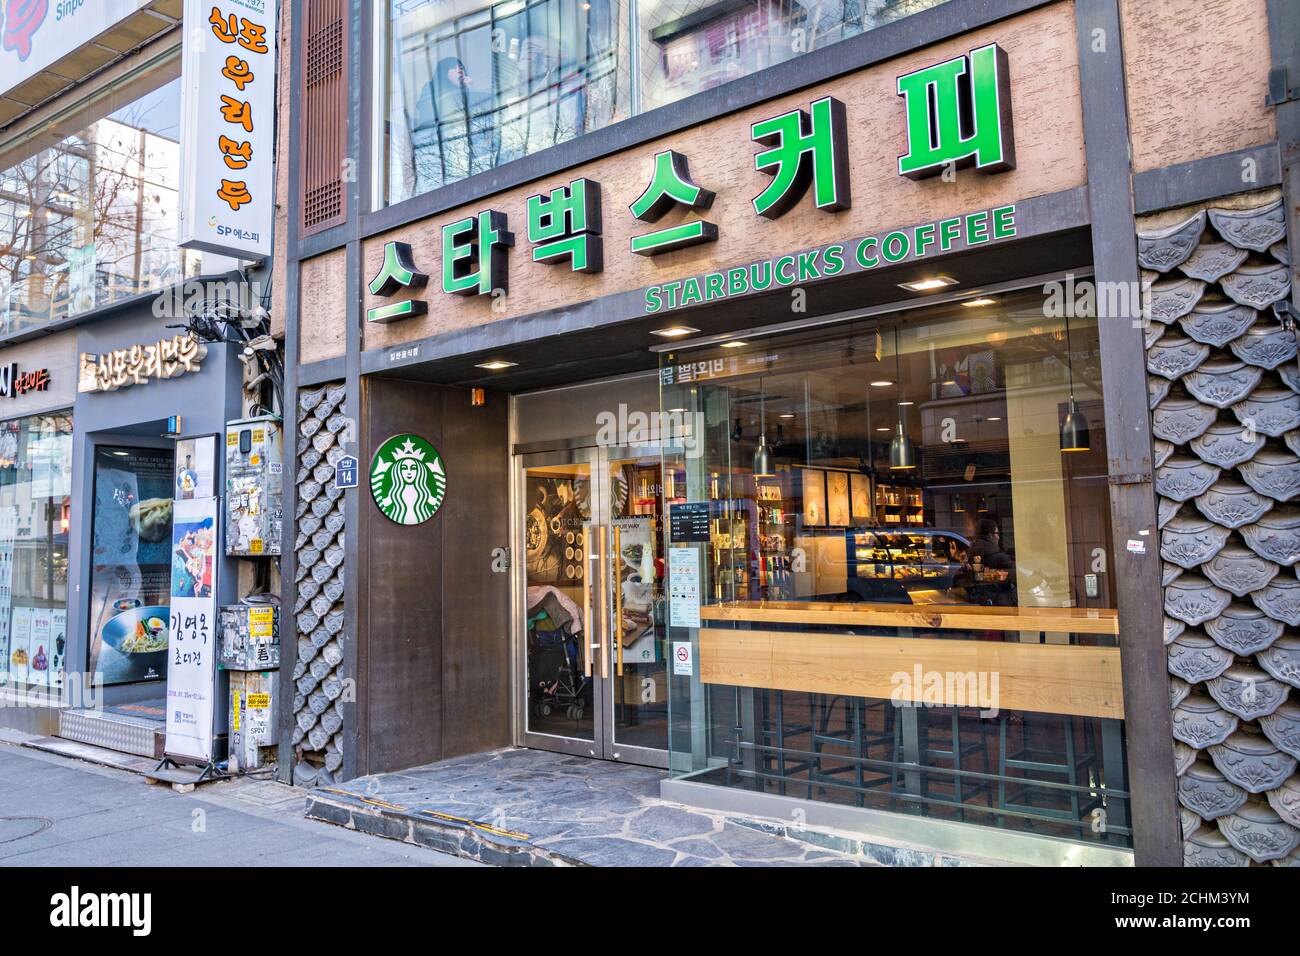 Starbucks Coffee shop in the Jongno-gu district of Seoul, South Korea. Starbucks has over 1,000 cafes throughout South Korea. This Starbucks in the only one in Asia where the outside signage is not written in English Stock Photo